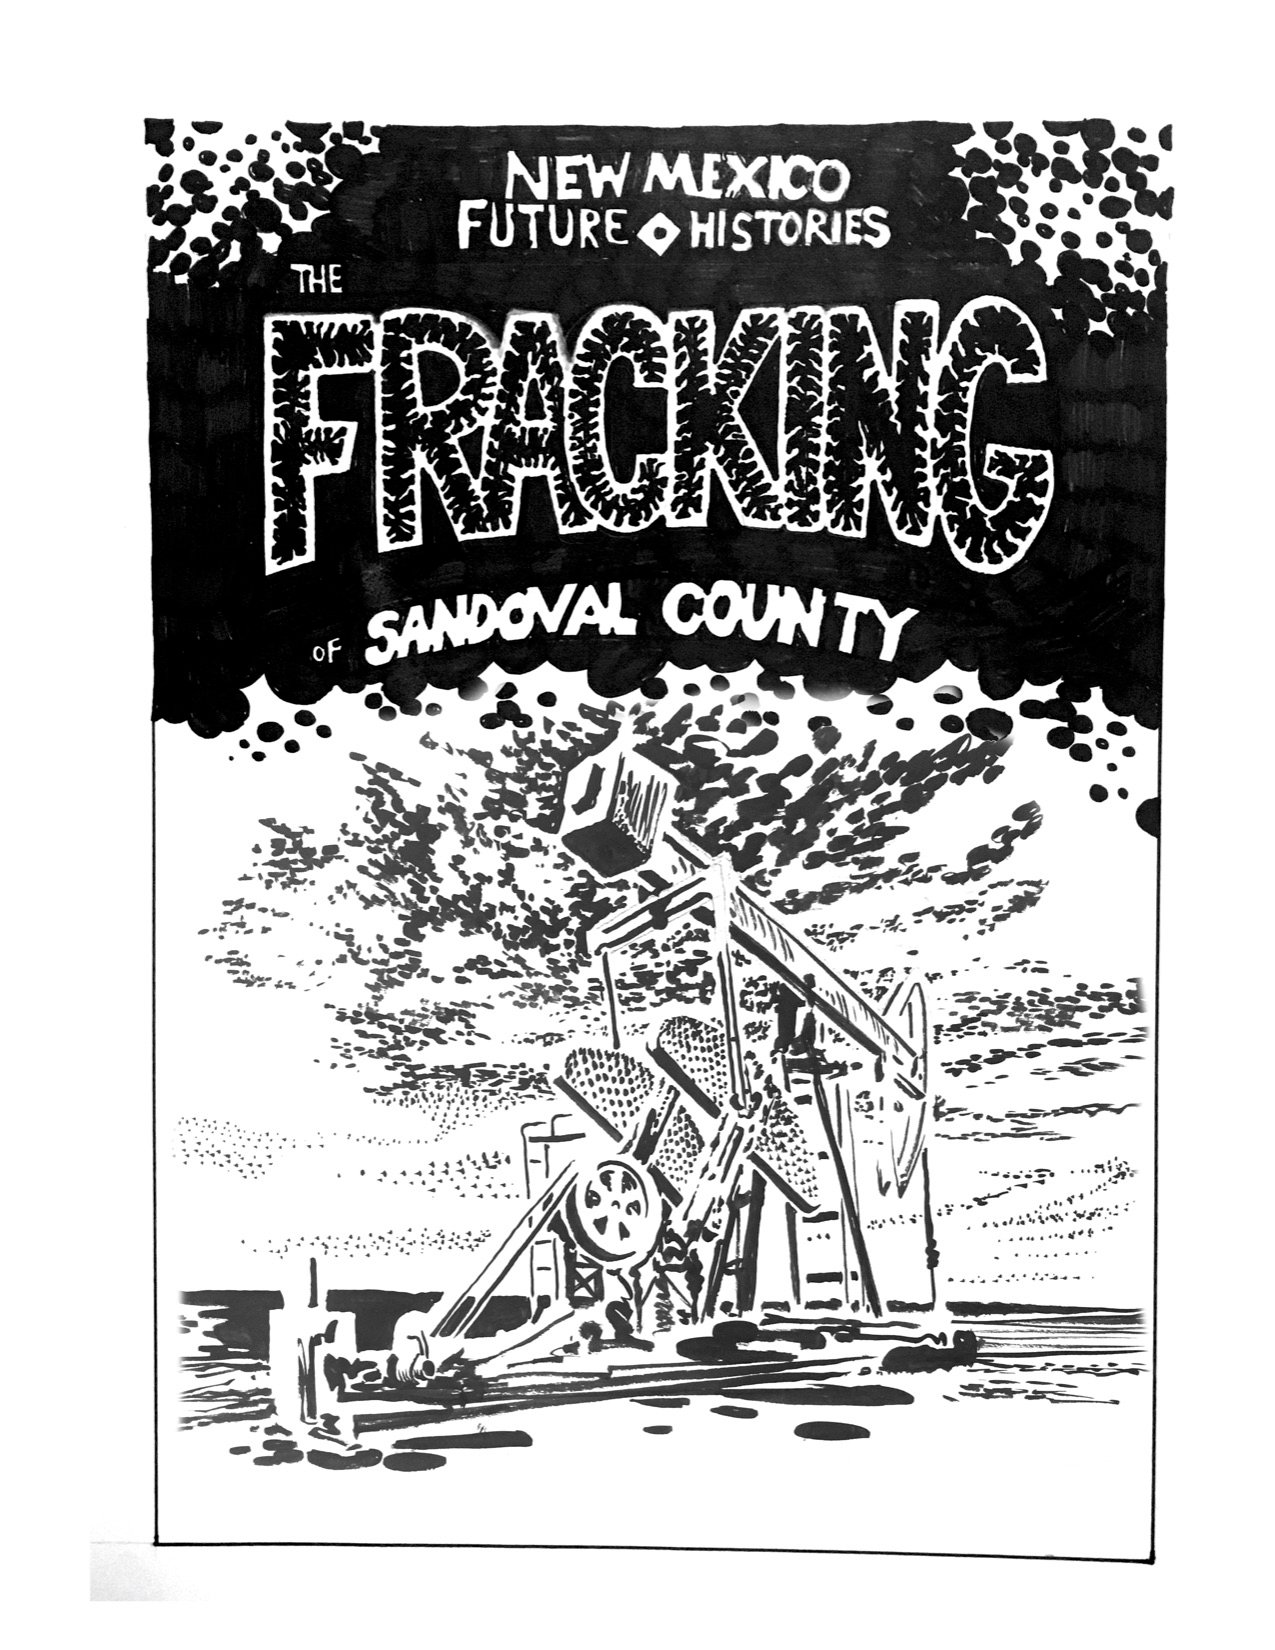 Image of The Fracking of Sandoval County